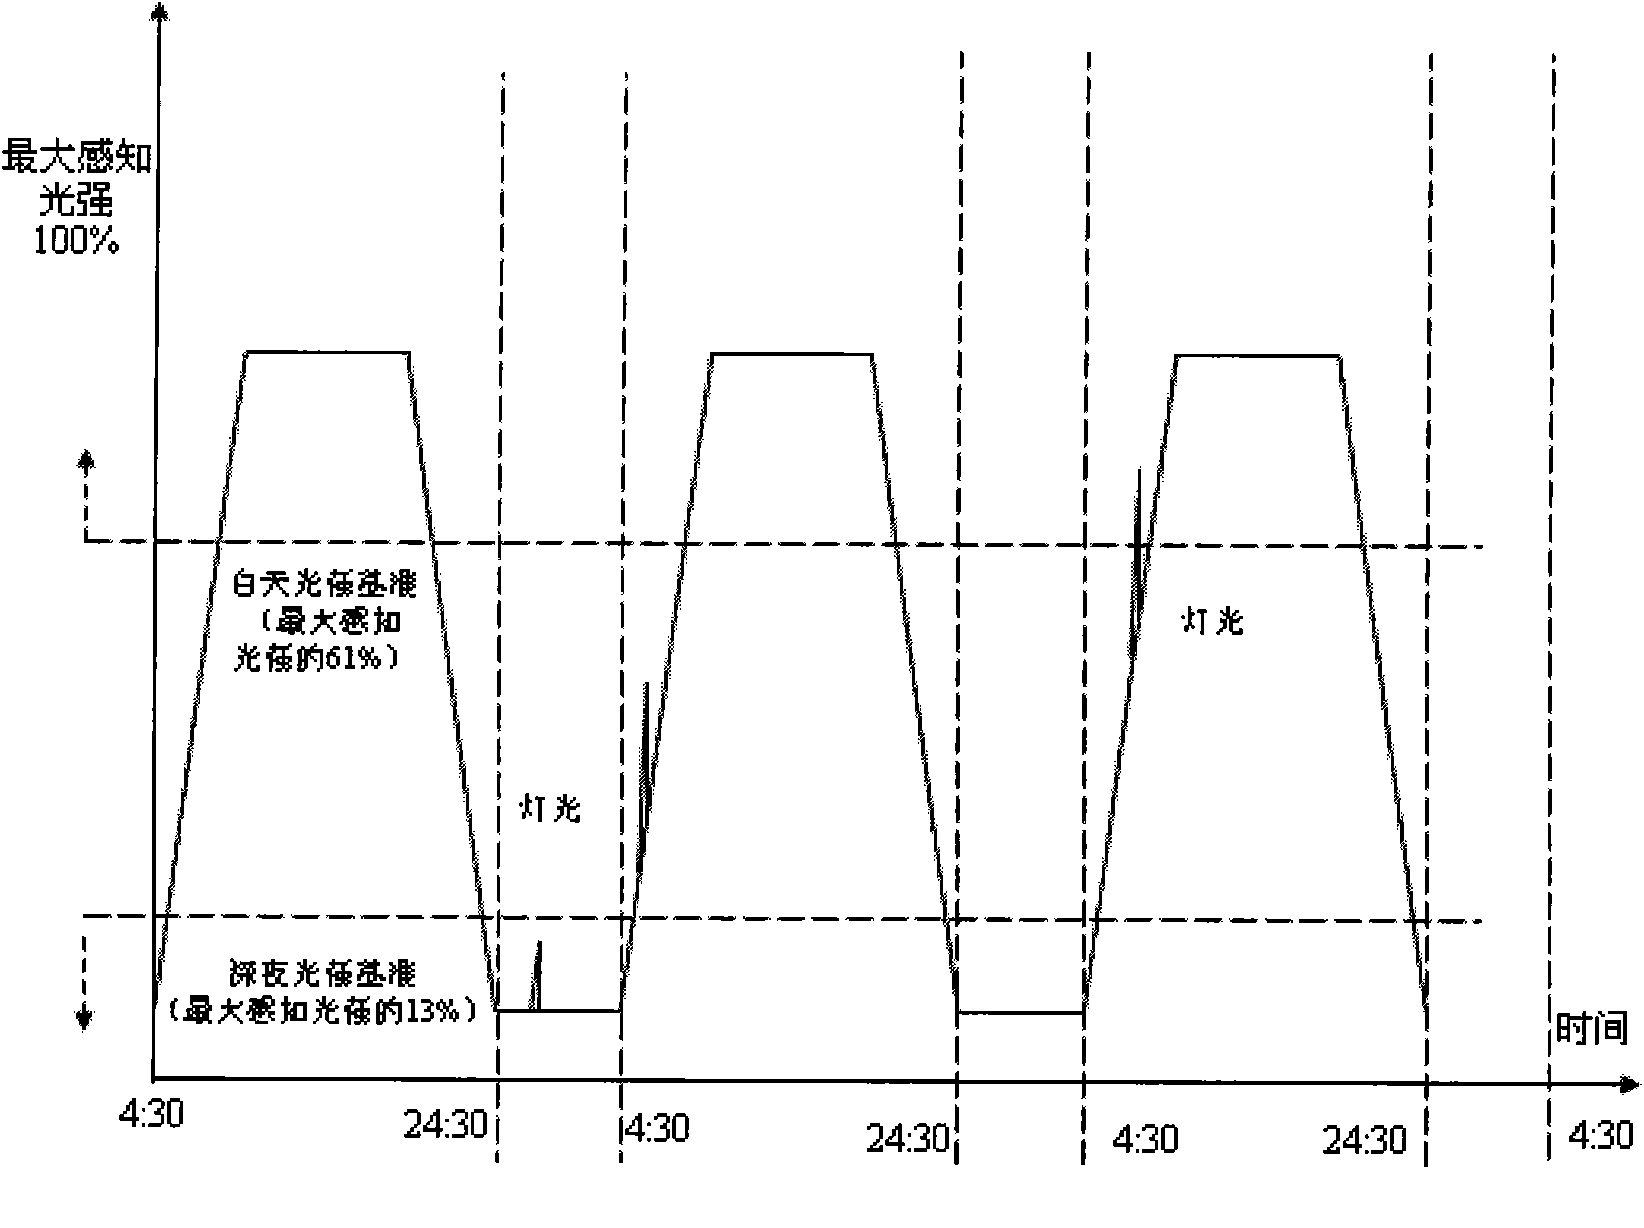 Air-cooled variable-frequency multi-door refrigerator capable of working with low noise at night and control method thereof